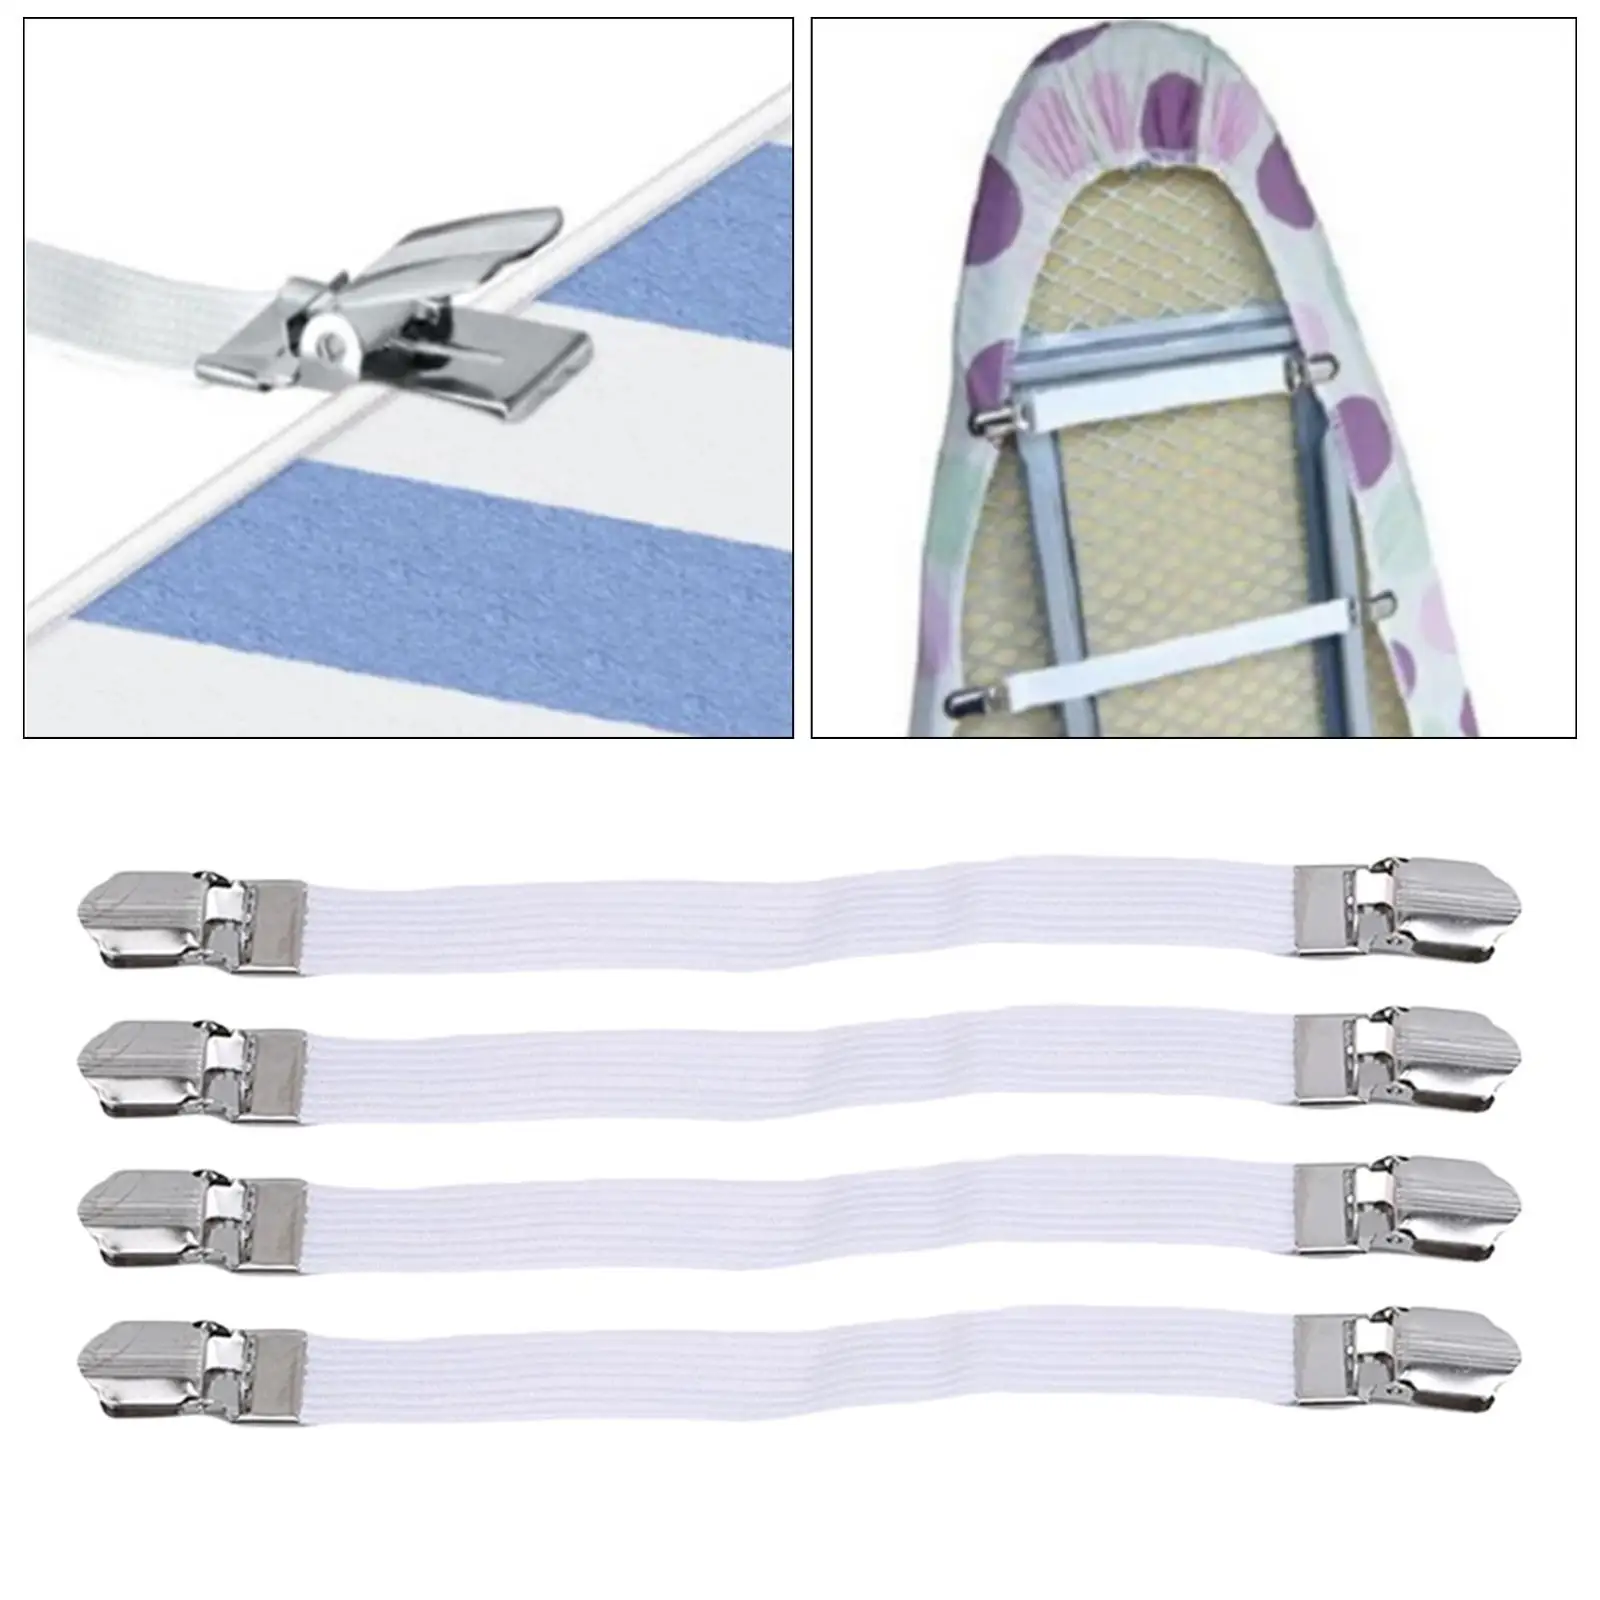 4x Ironing Board Cover Fasteners Straps Clips Bed Sheet Fasteners Adjustable Non Slip Corner Holder Gripper for Mattress